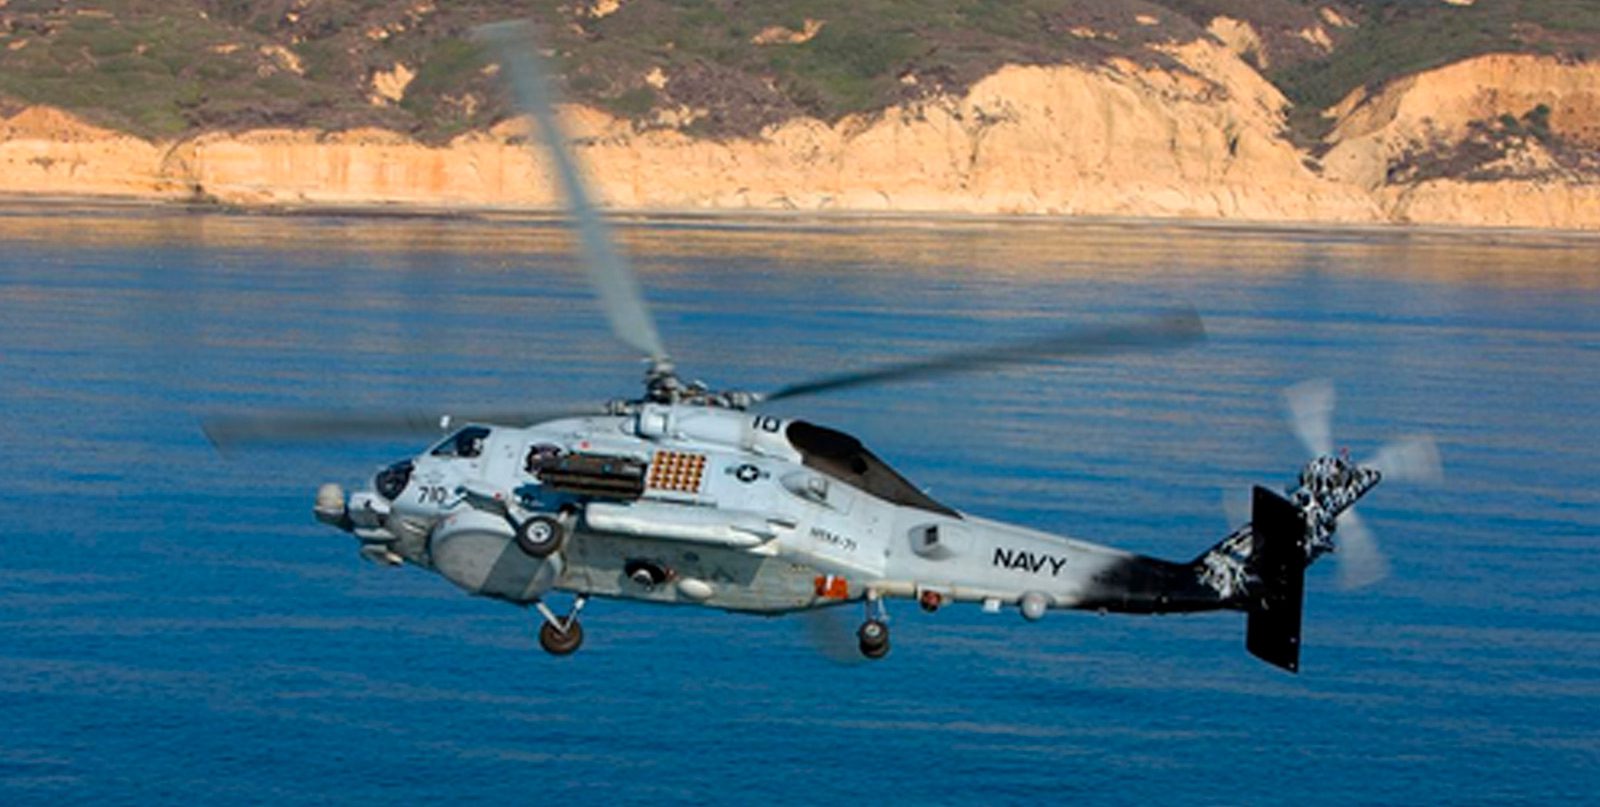 Lockheed Martin has received a contract from the US Navy to build eight MH-60R SEAHAWK helicopters for the Spanish Navy. Pictured: a US Navy MH-60R aircraft.